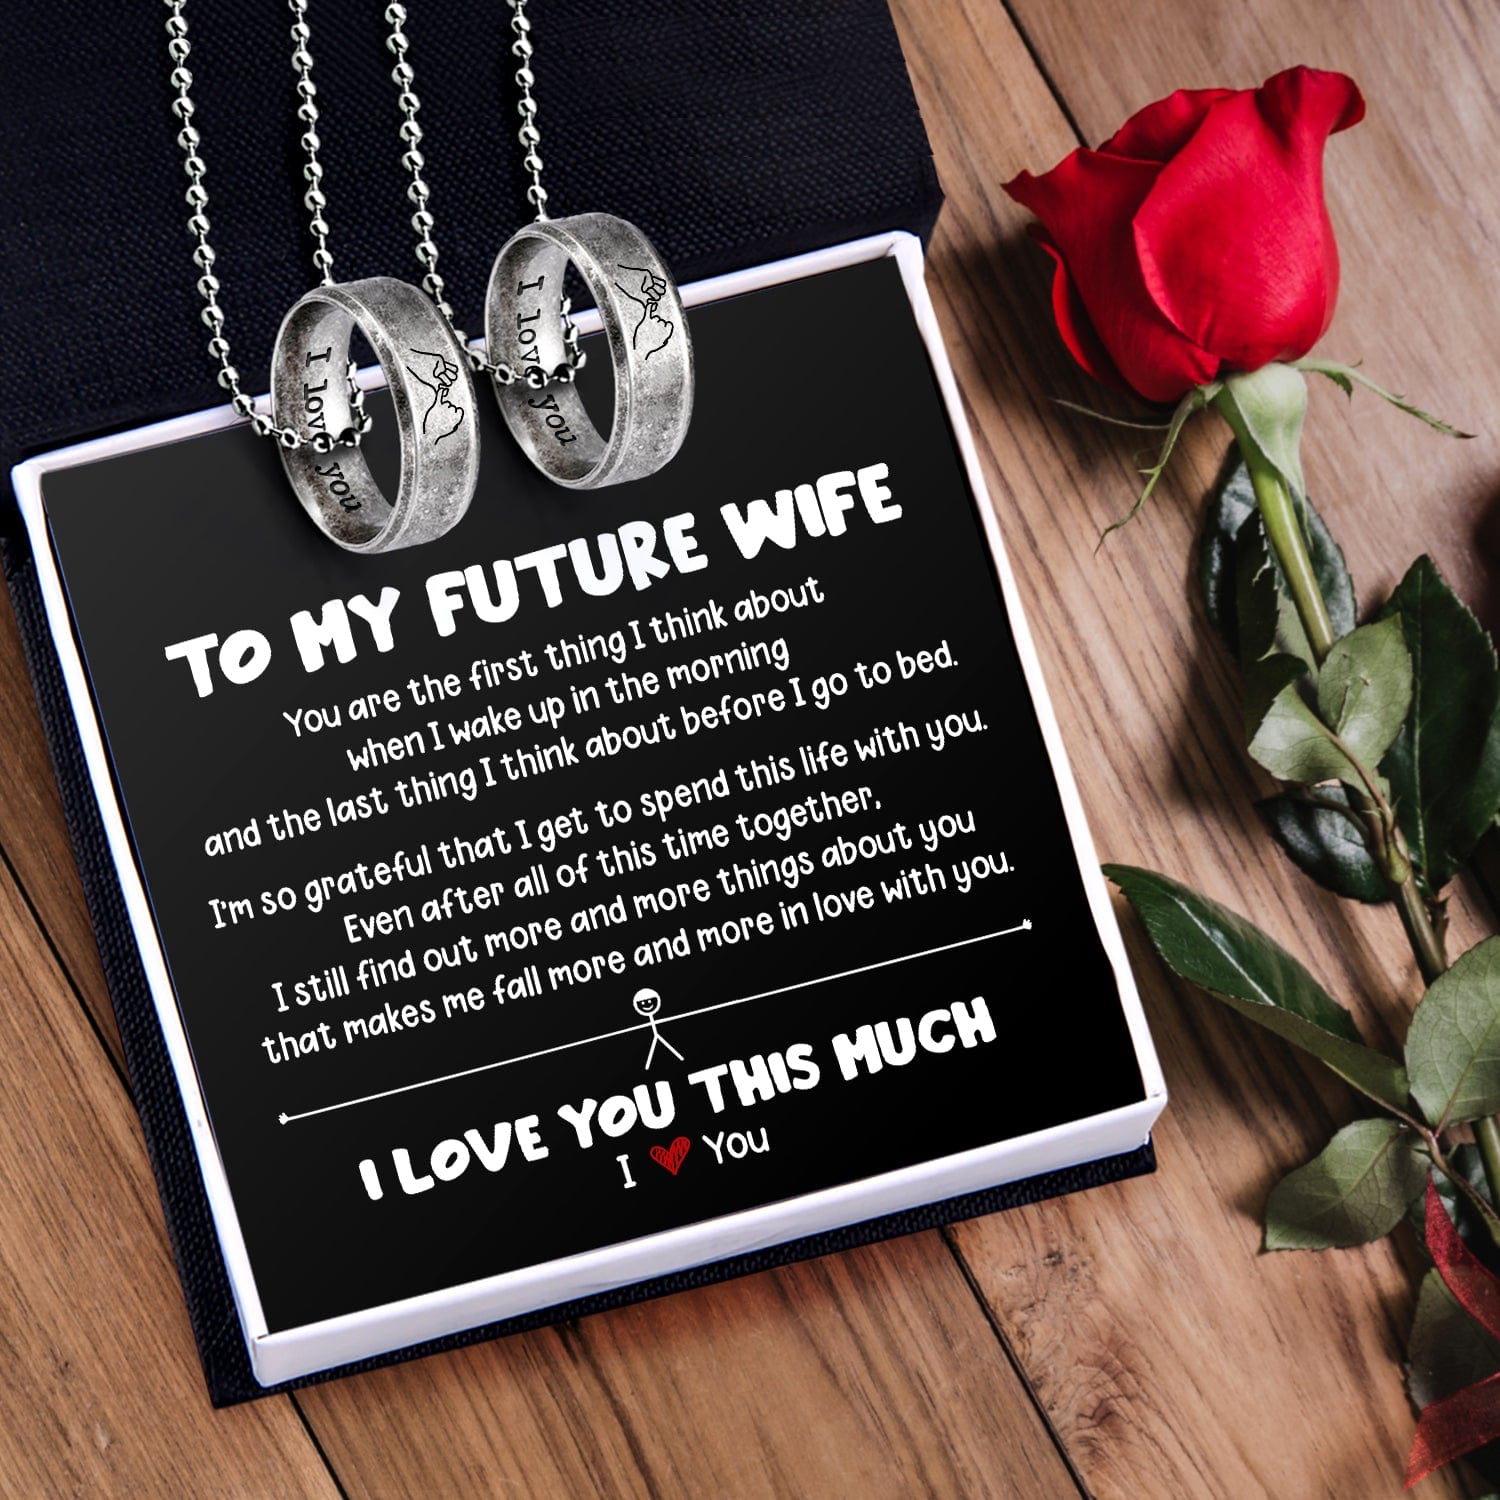 Steel Couple Necklaces - Family - To My Future Wife - I'm So Grateful That I Get To Spend This Life With You - Gndx25004